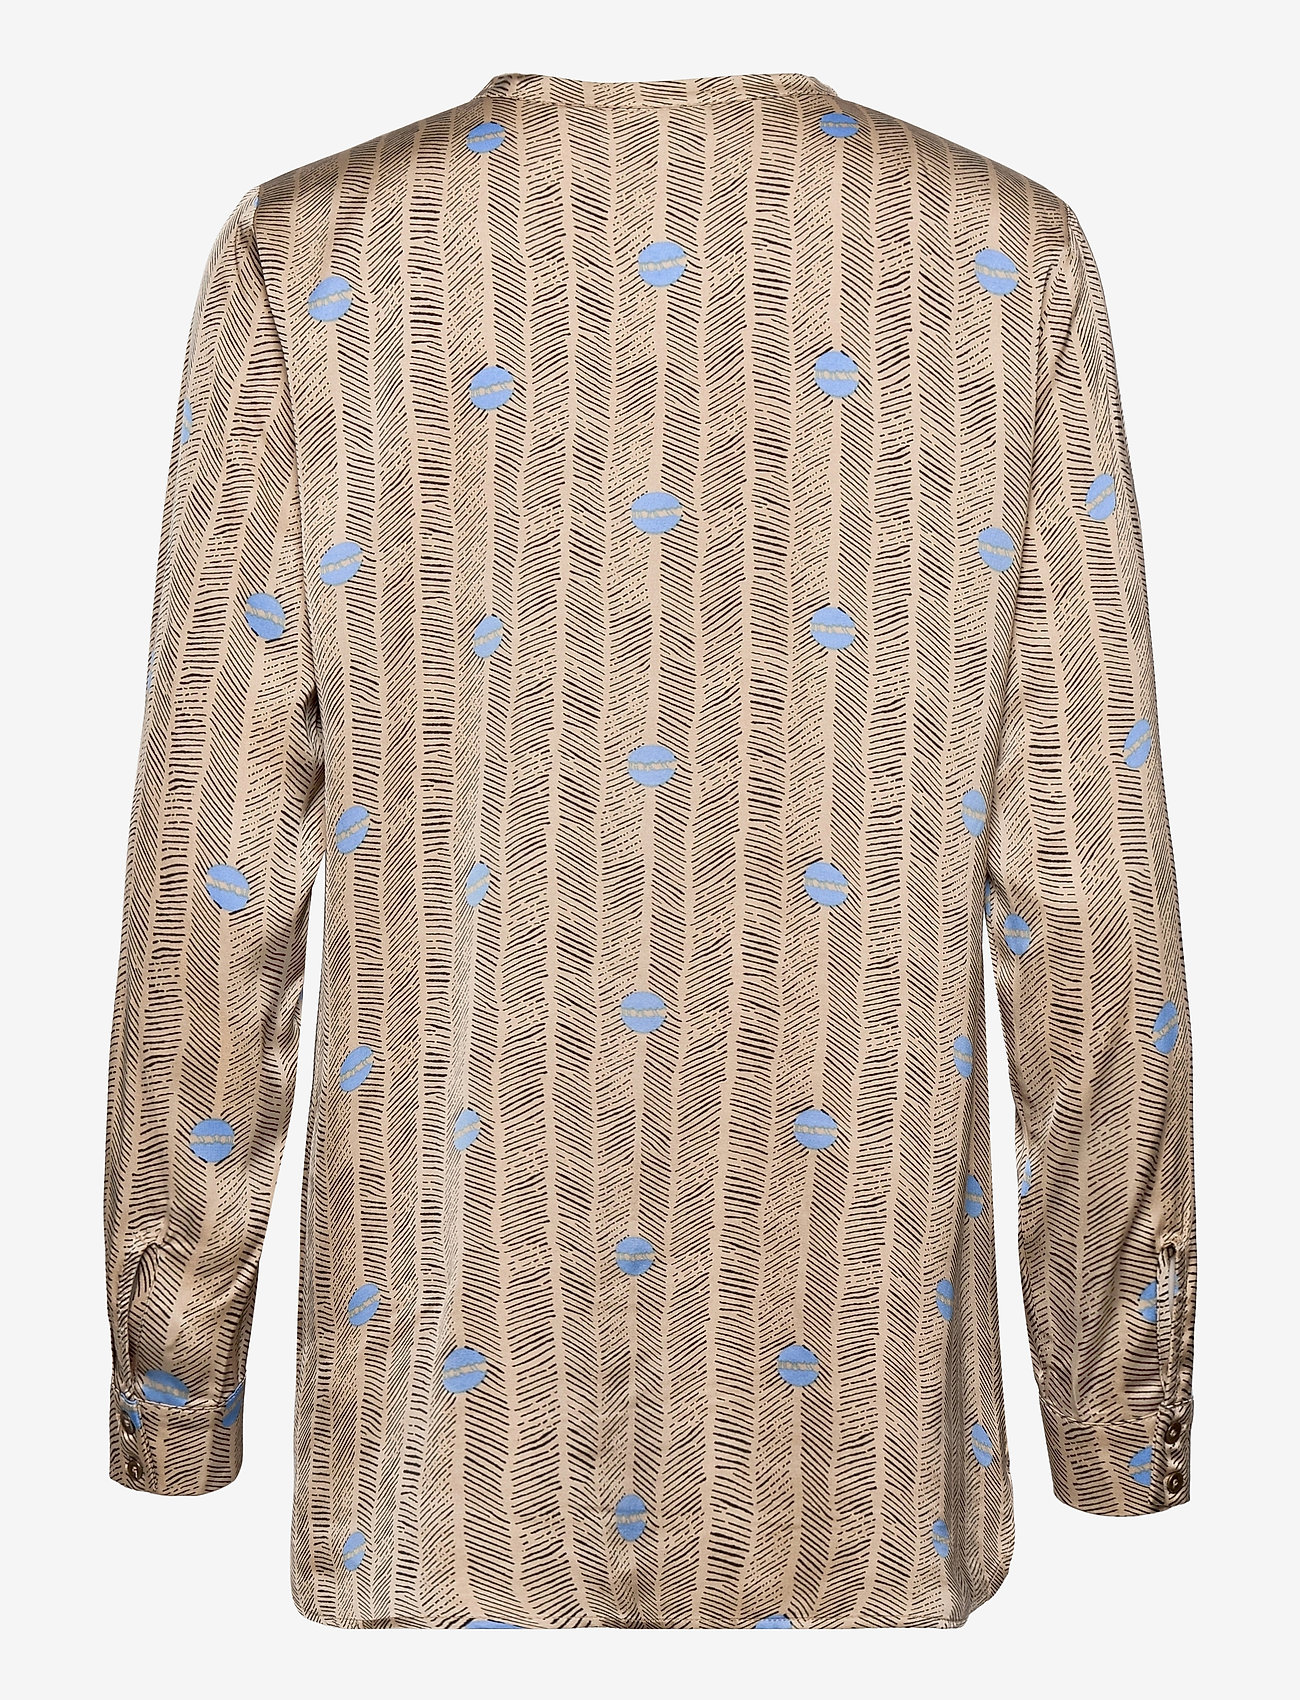 Coster Copenhagen - Shirt blouse in Sprout print - langermede bluser - sprout print - sand - 1